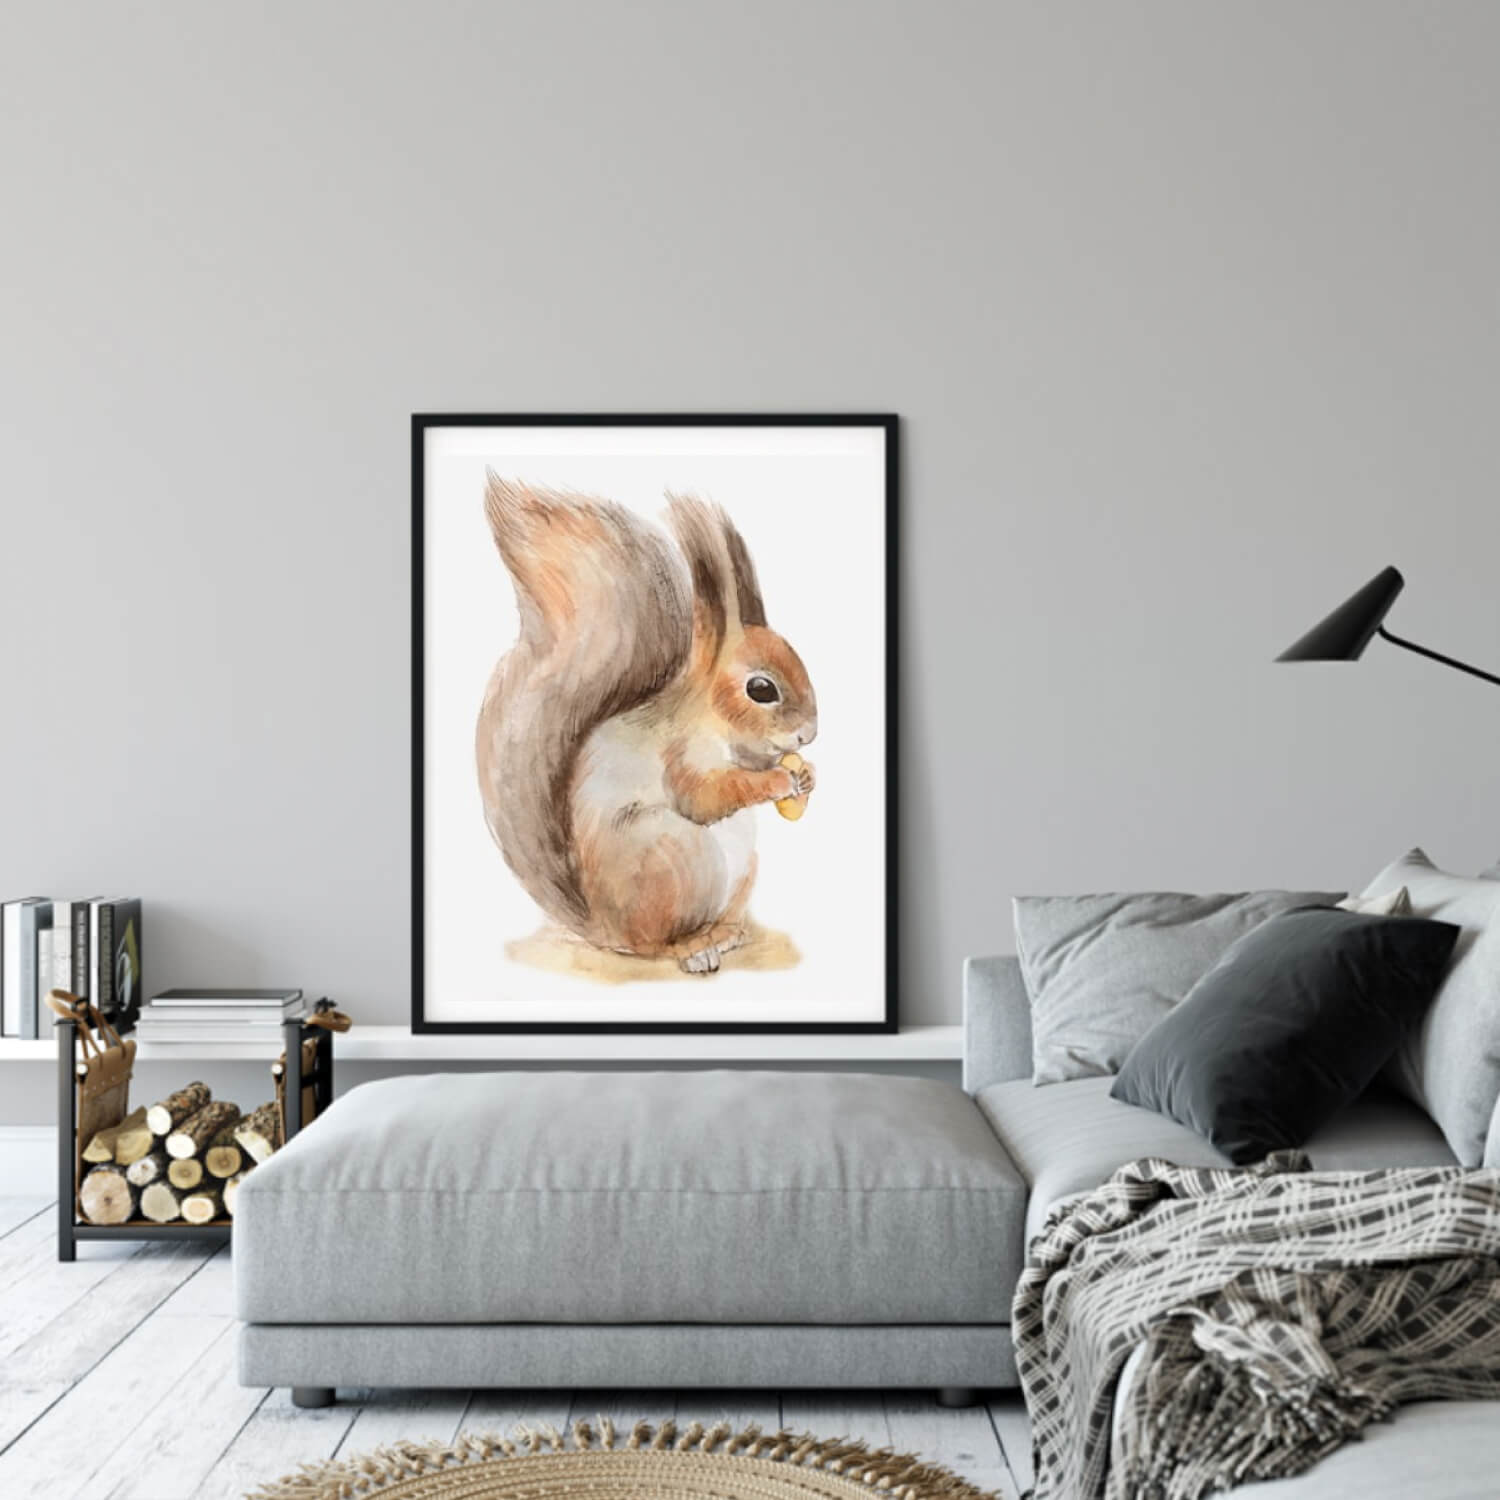 Painting of a squirrel in a gray tone room.